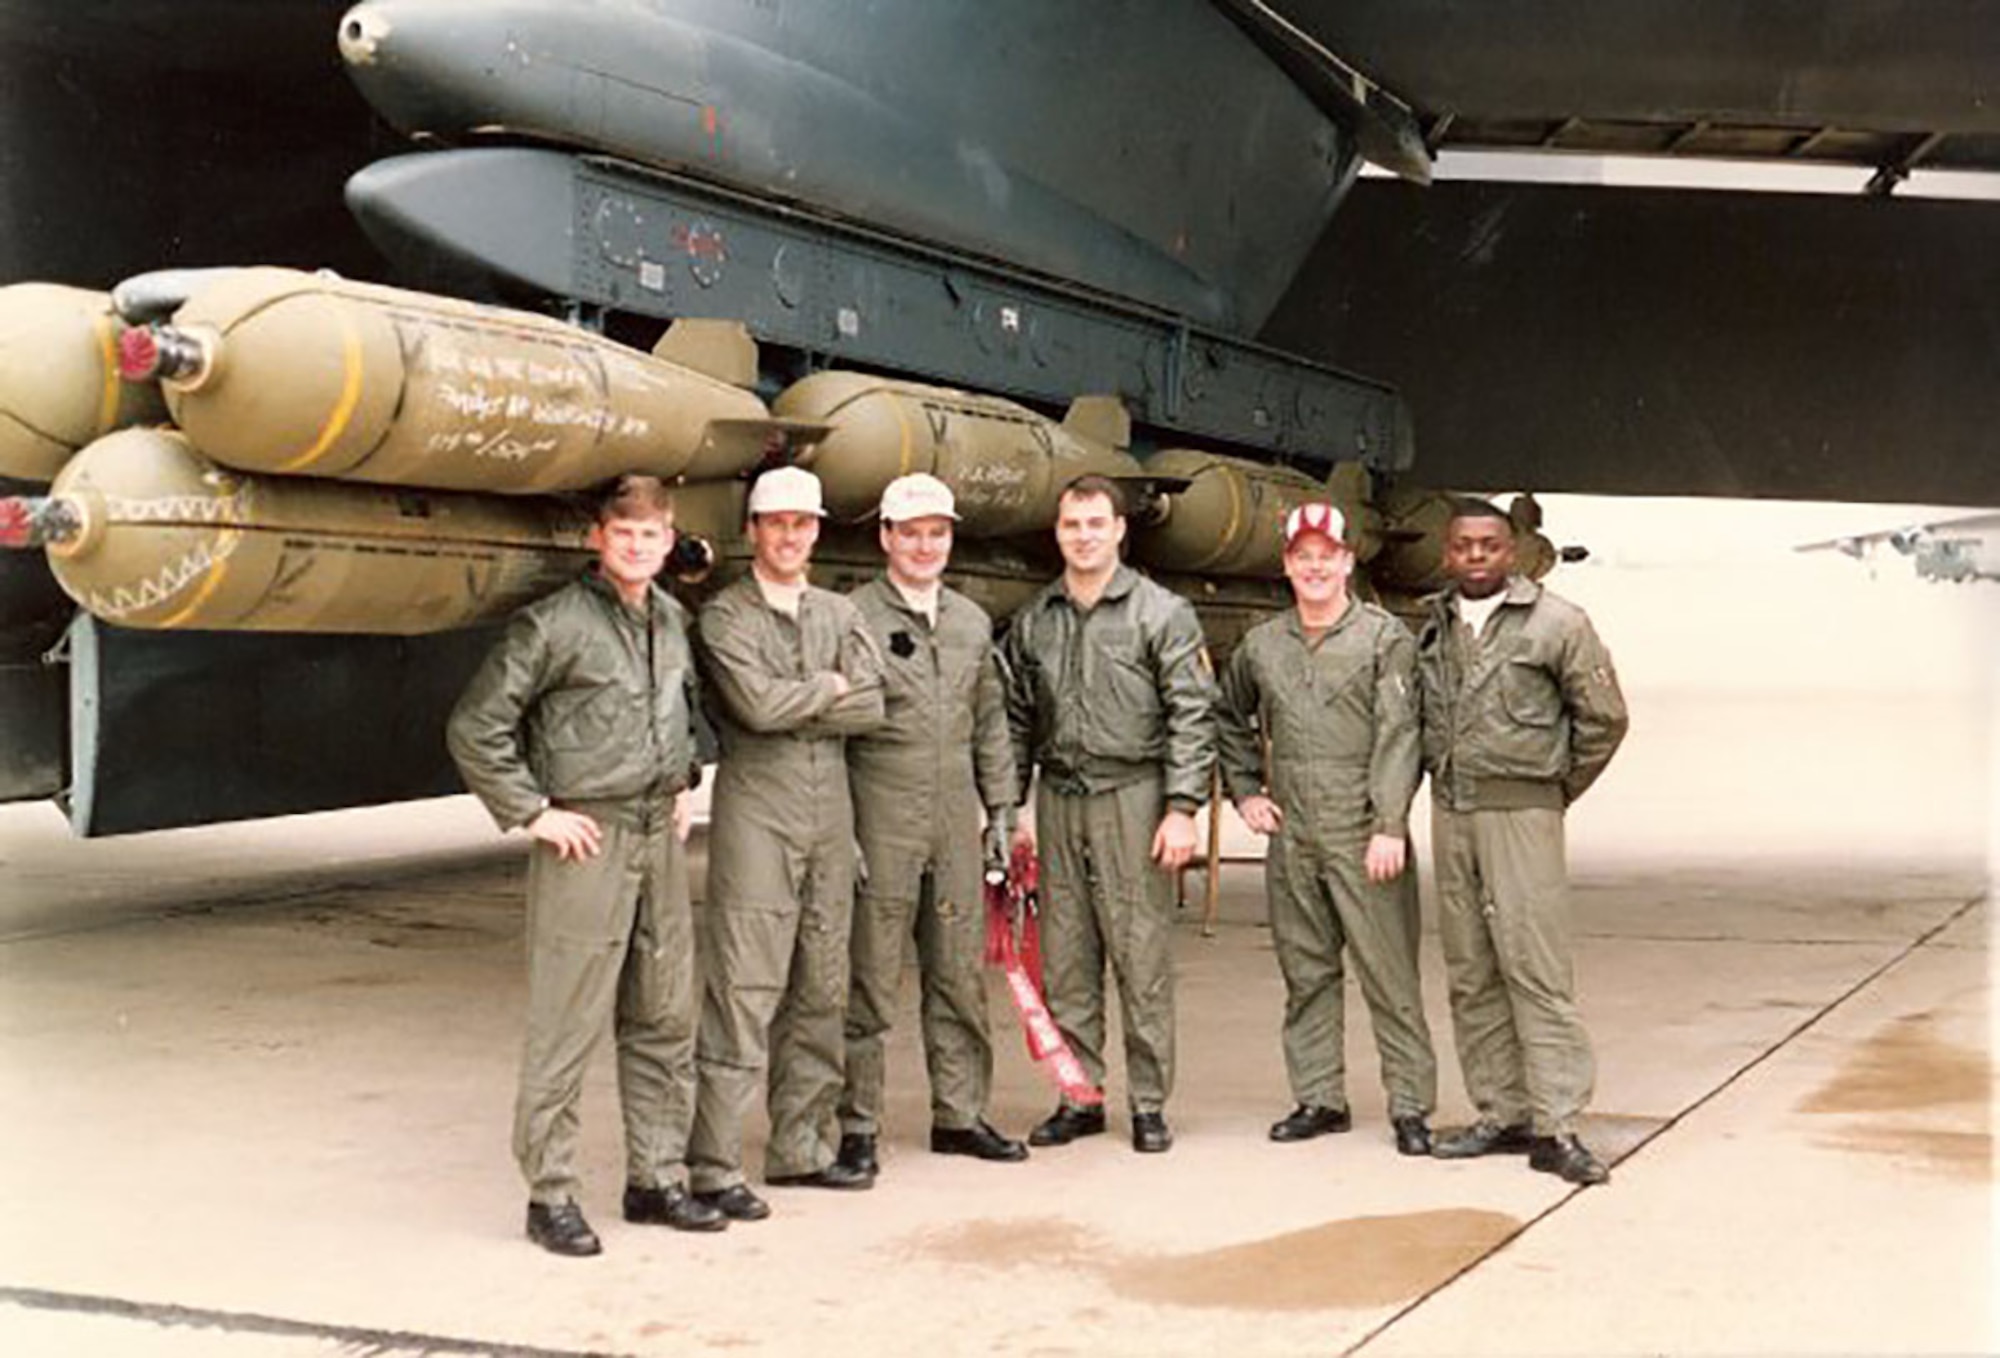 Airmen pose outside a B-52 back in 1991.